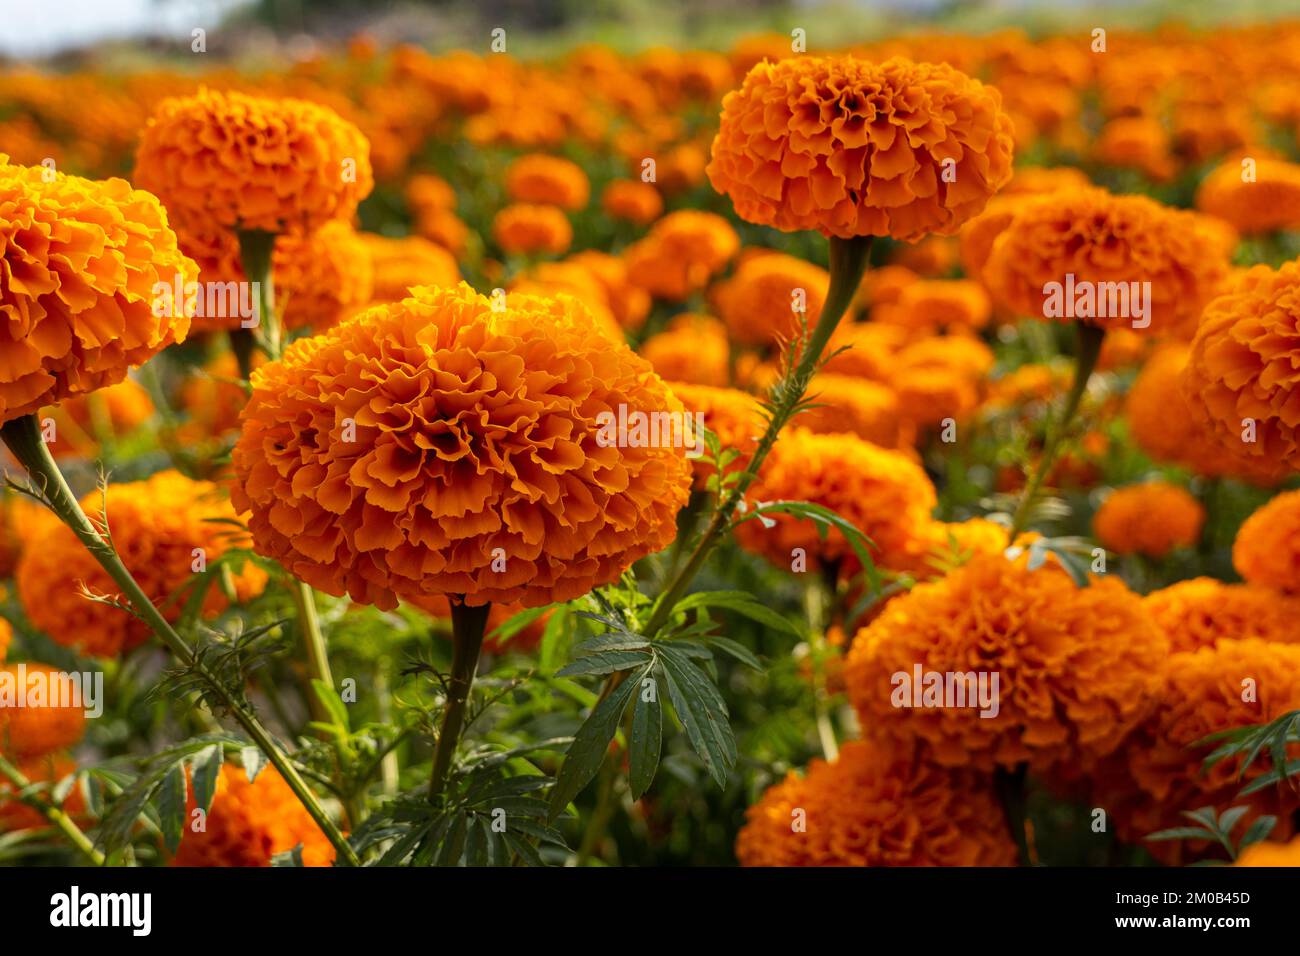 hands of Mexican farmer growing cempasuchil tagete flowers mexico latin america Stock Photo